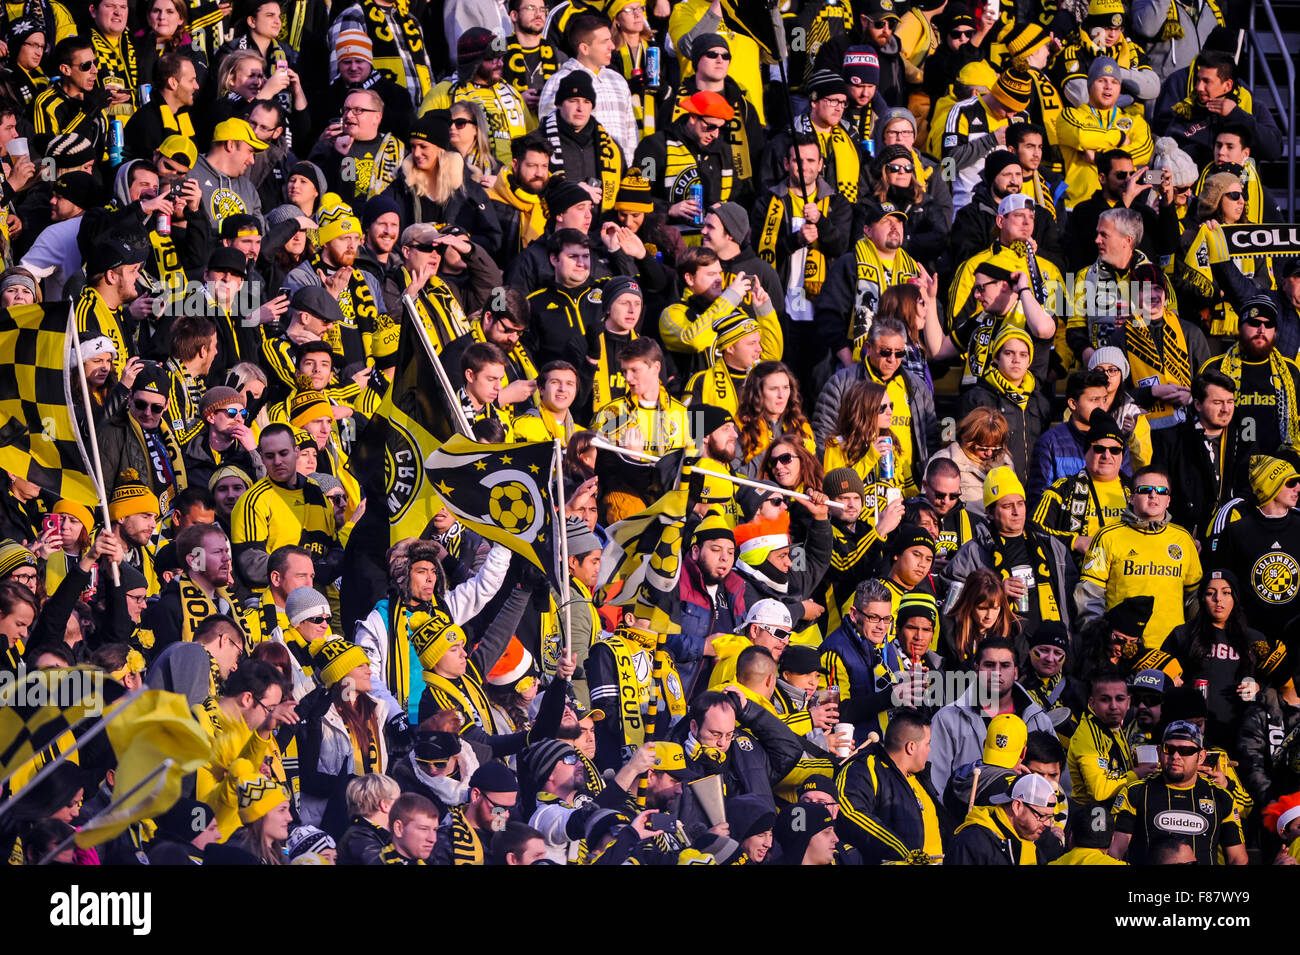 December 6, 2015 - Columbus Crew SC fans cheer .during the match between Portland Timbers and Columbus Crew SC in the 2015 MLS Cup Final at MAPFRE Stadium in Columbus Ohio .Photo Credit: Dorn Byg/CSM Stock Photo